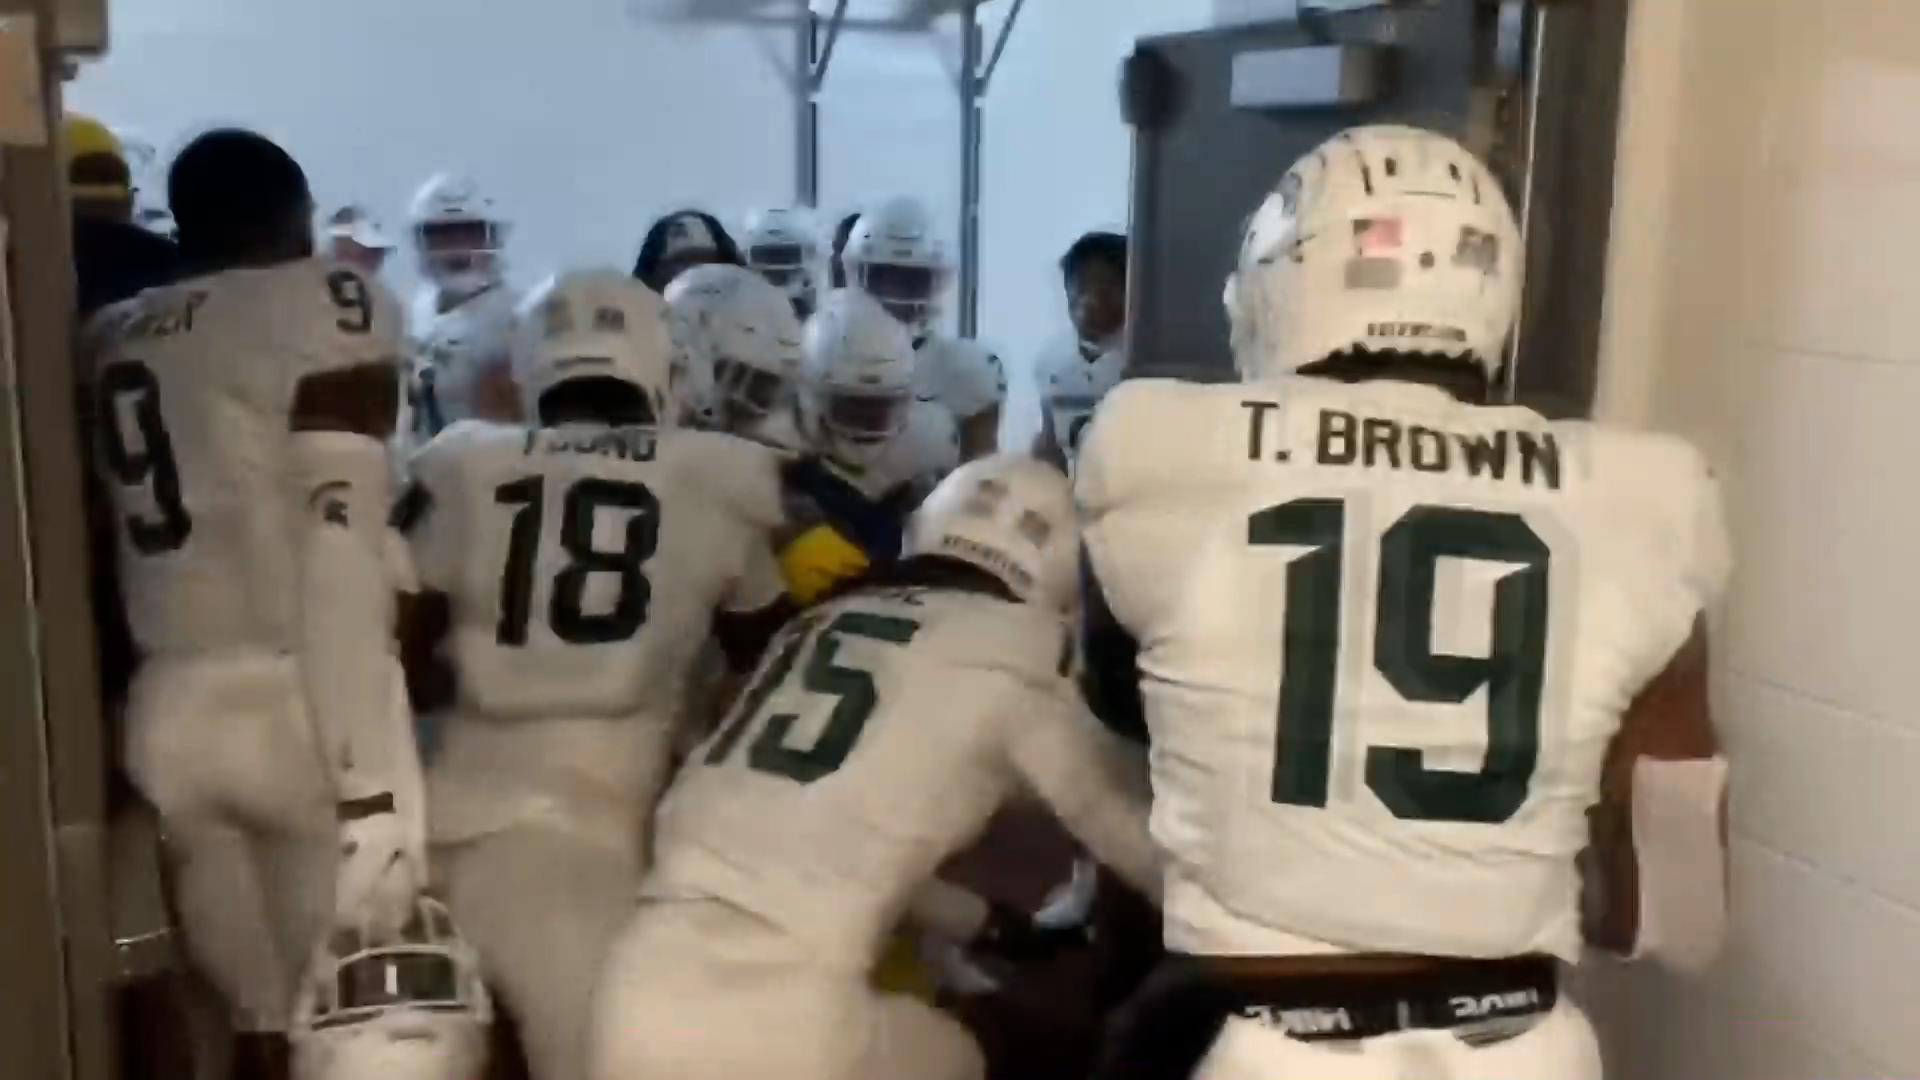 Michigan State University fined $100,000 after huge tunnel brawl